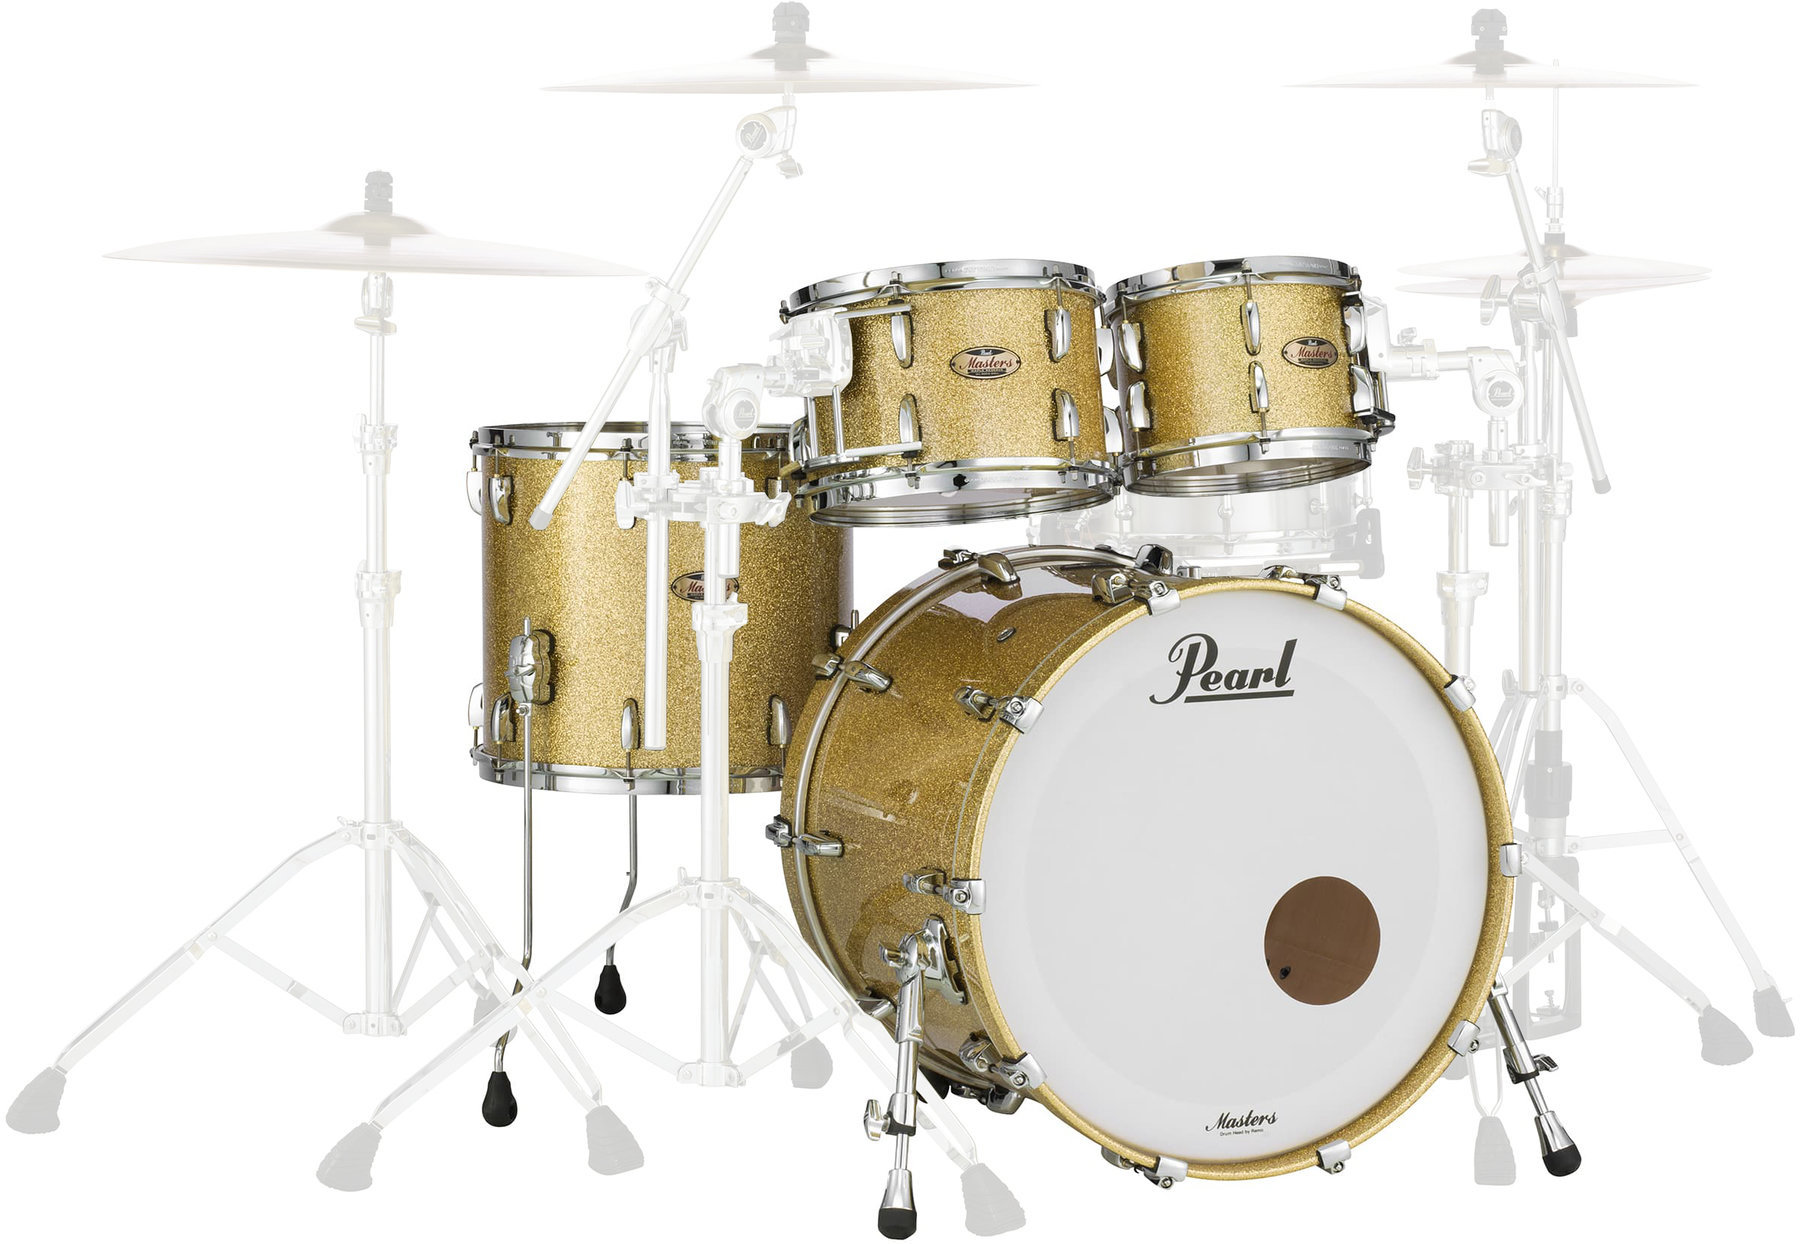 Batterie acoustique Pearl MRV904XEP-C347 Masters Maple Reserve Bombay Gold Sparkle